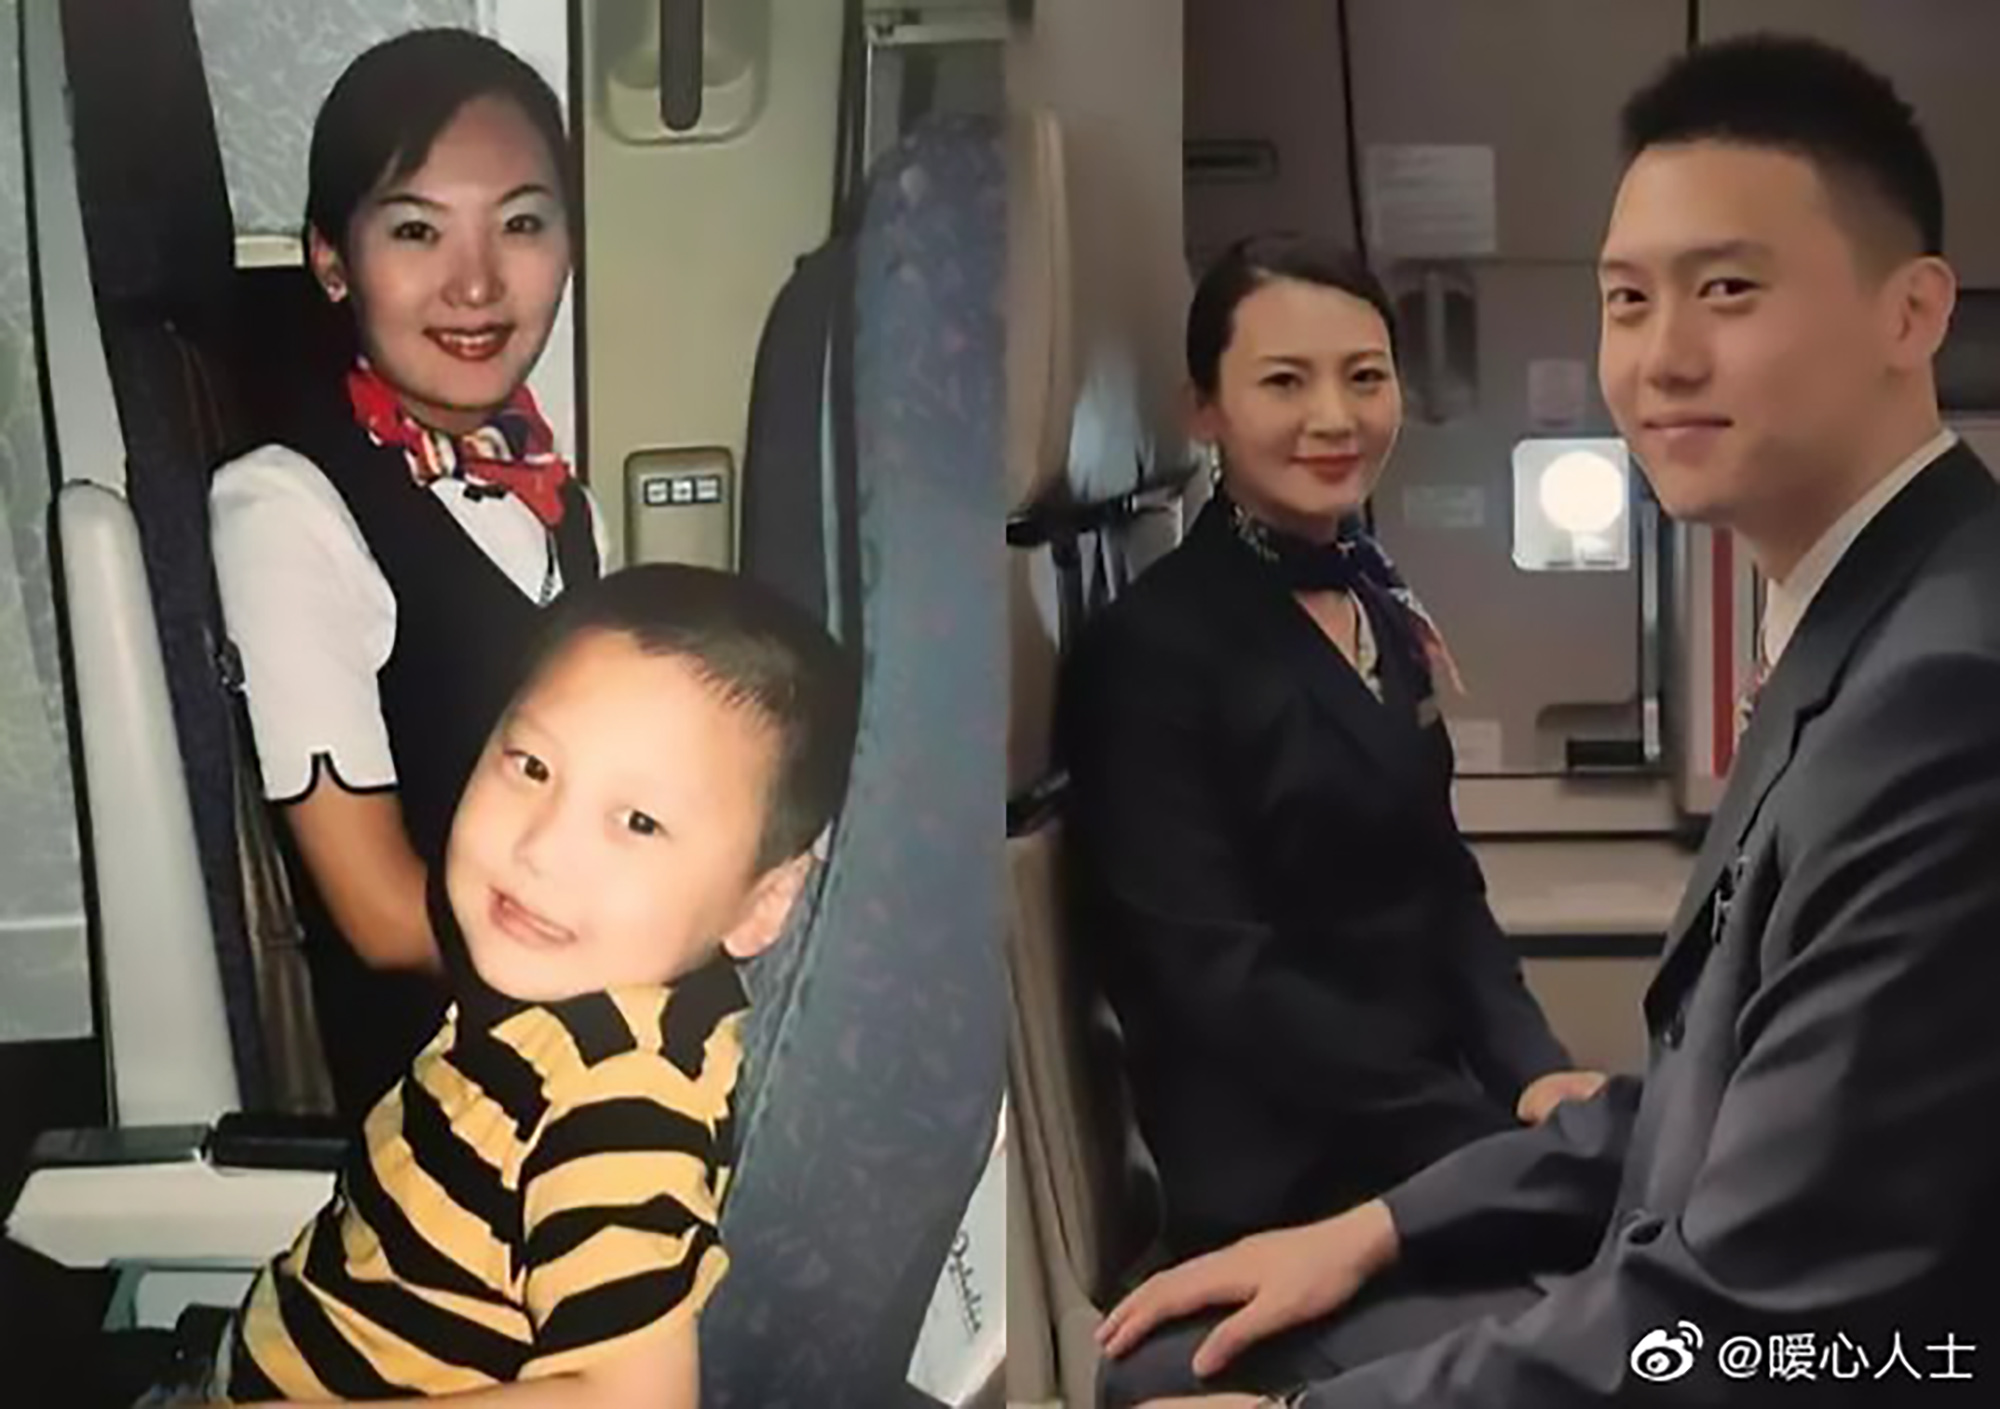 Read more about the article Flight Attendant In Pic With 5yo Is His Boss 15yrs Later